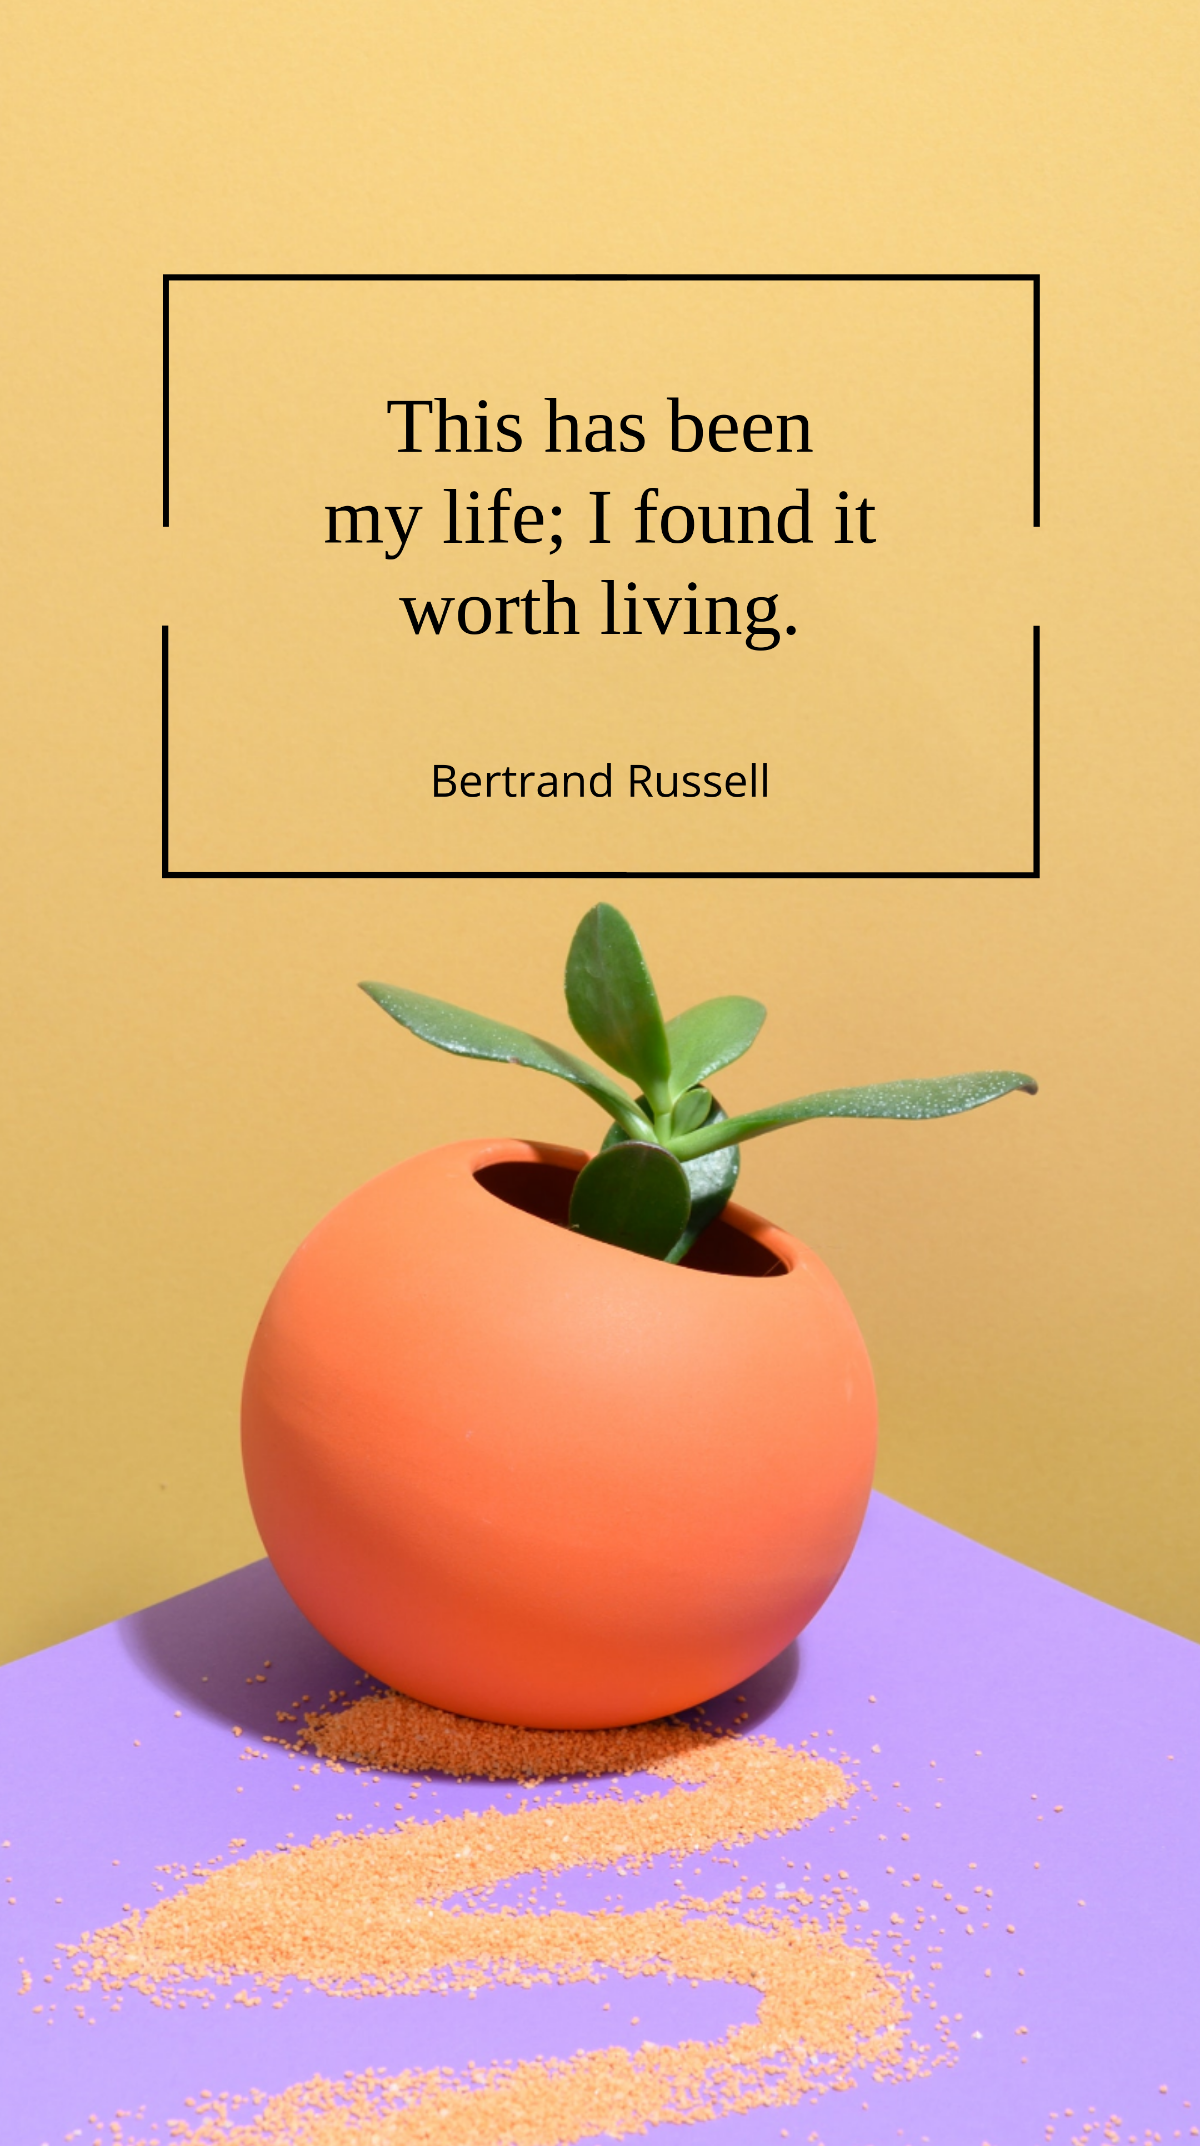 Bertrand Russell - “This has been my life; I found it worth living.”